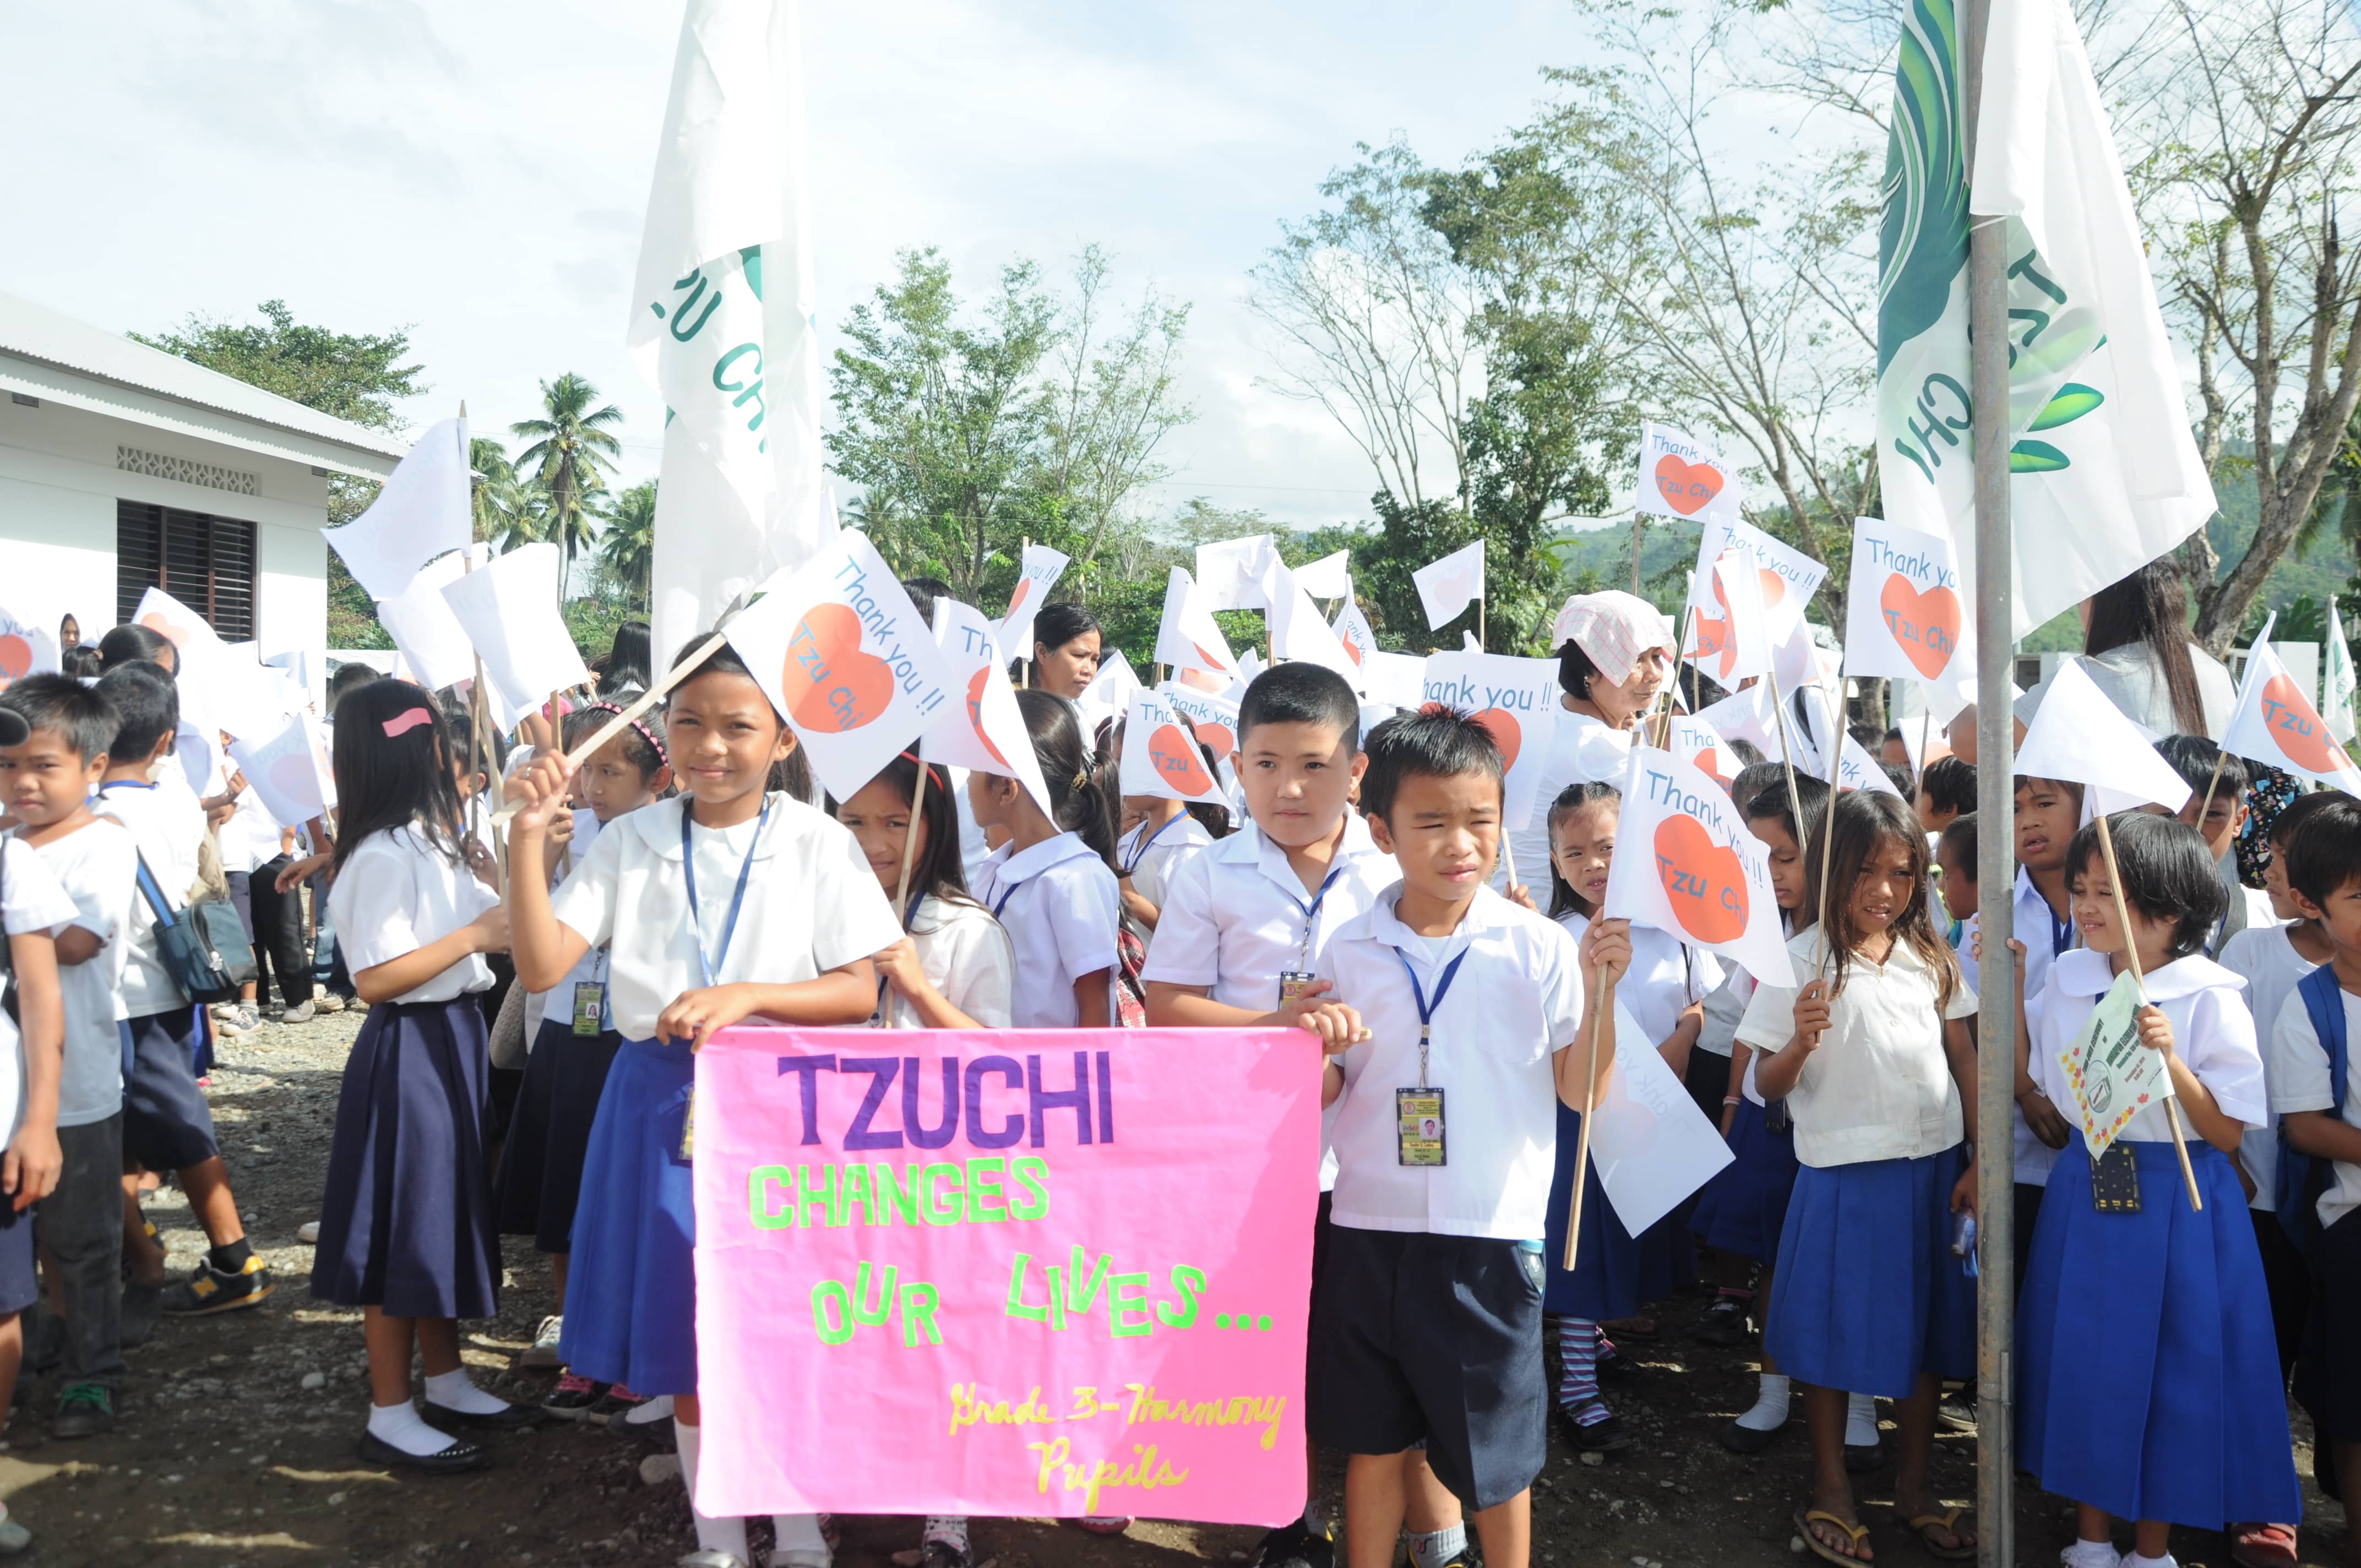 Mangayon Elementary School’s Grade 3 students wave their banner and flags to welcome Tzu Chi volunteers during the turnover ceremony of their rebuilt school on December 1, 2014.